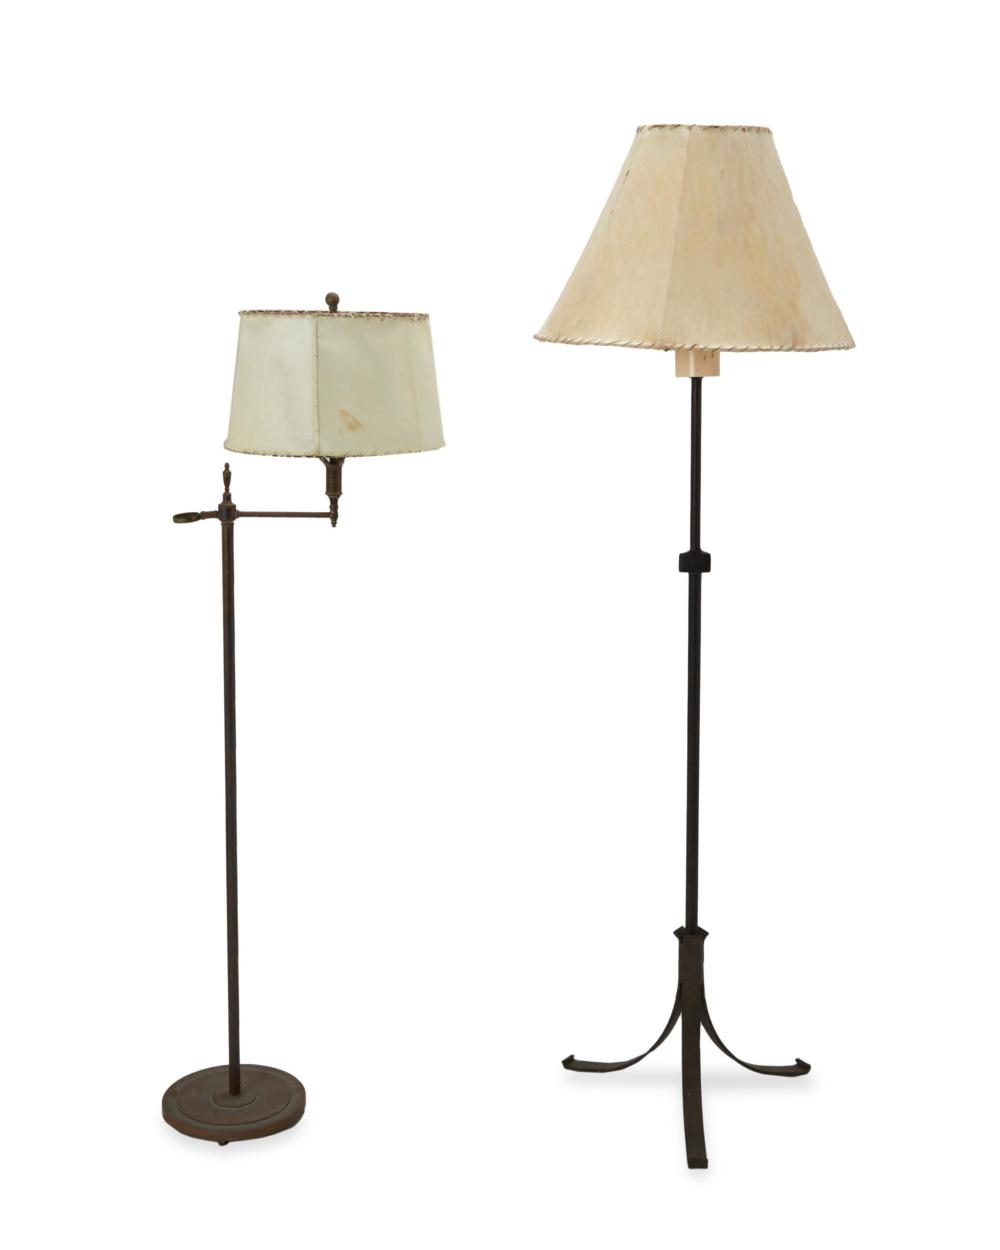 TWO FLOOR LAMPS WITH HIDE SHADESTwo